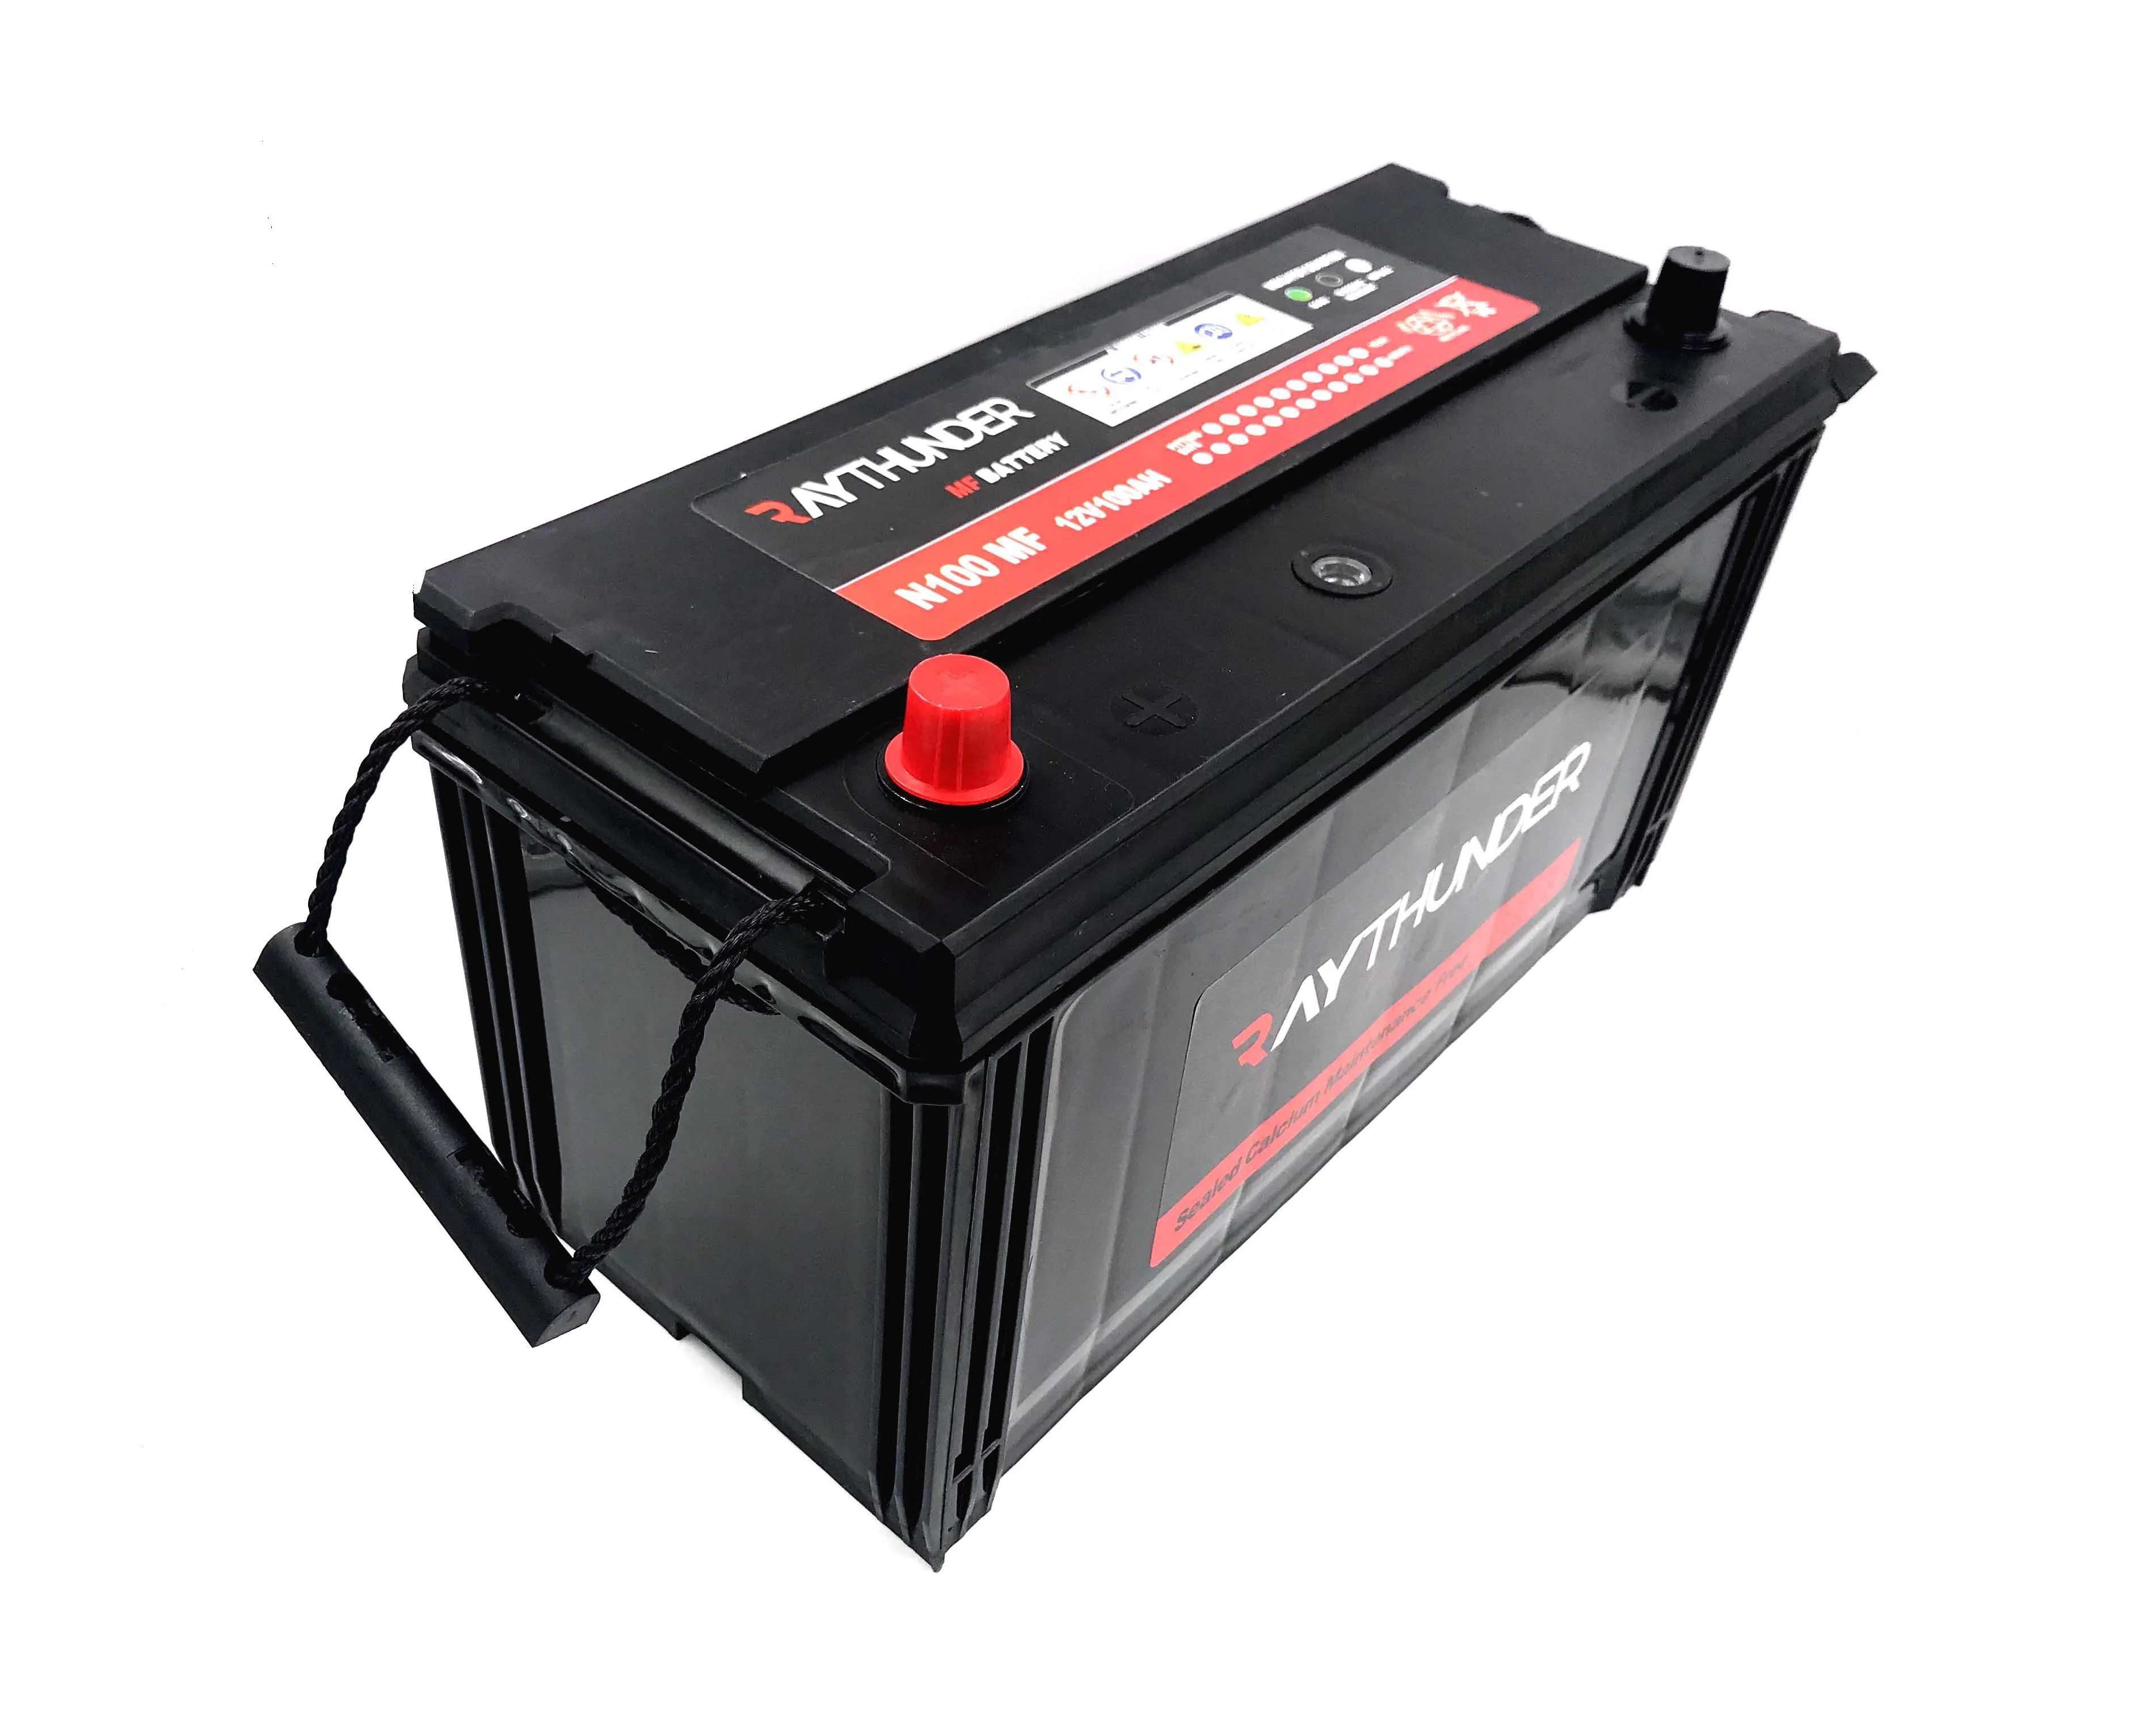 Weven eigenaar heroïsch Maintenance Free Auto Battery With Cheap Price N100 12v 100ah For Car And  Truck - Buy Automotive Battery 12v 100ah For Starter,Smf Car Battery For  Solar System And Ups,Jis Japan Standard Mf